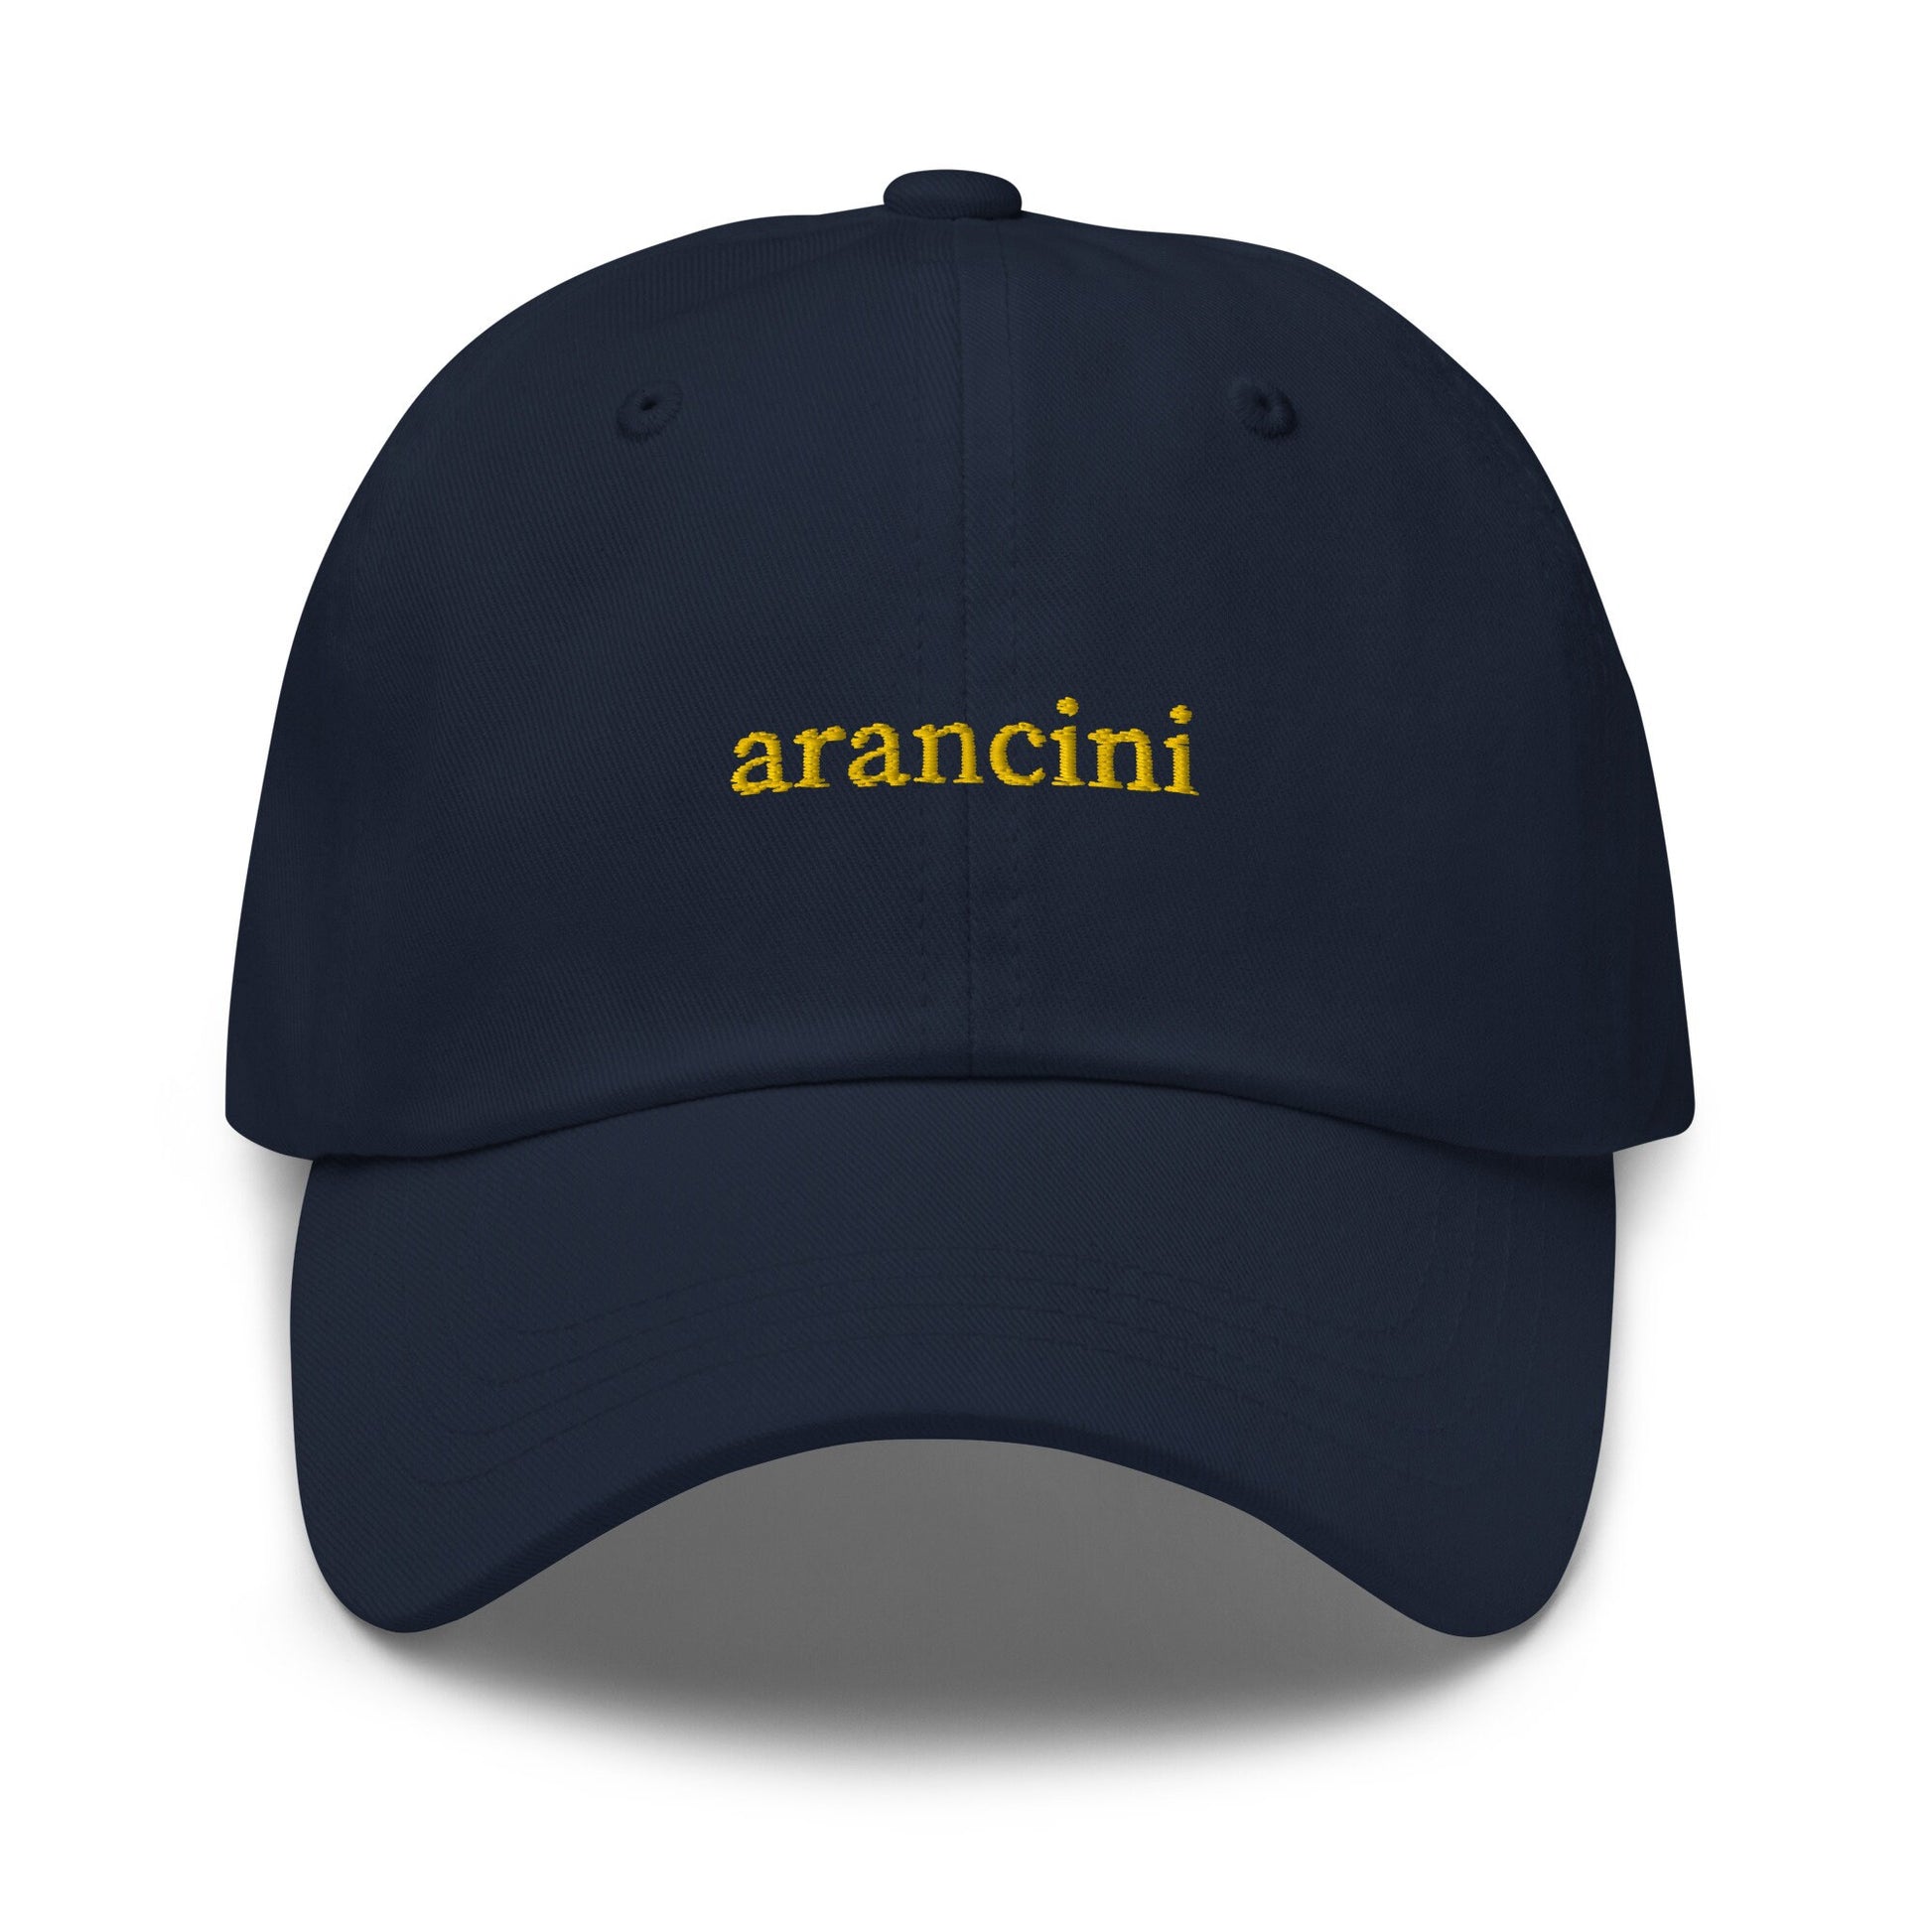 Arancini Dad Hat - Gift for Italian food lovers - Cotton embroidered Cap